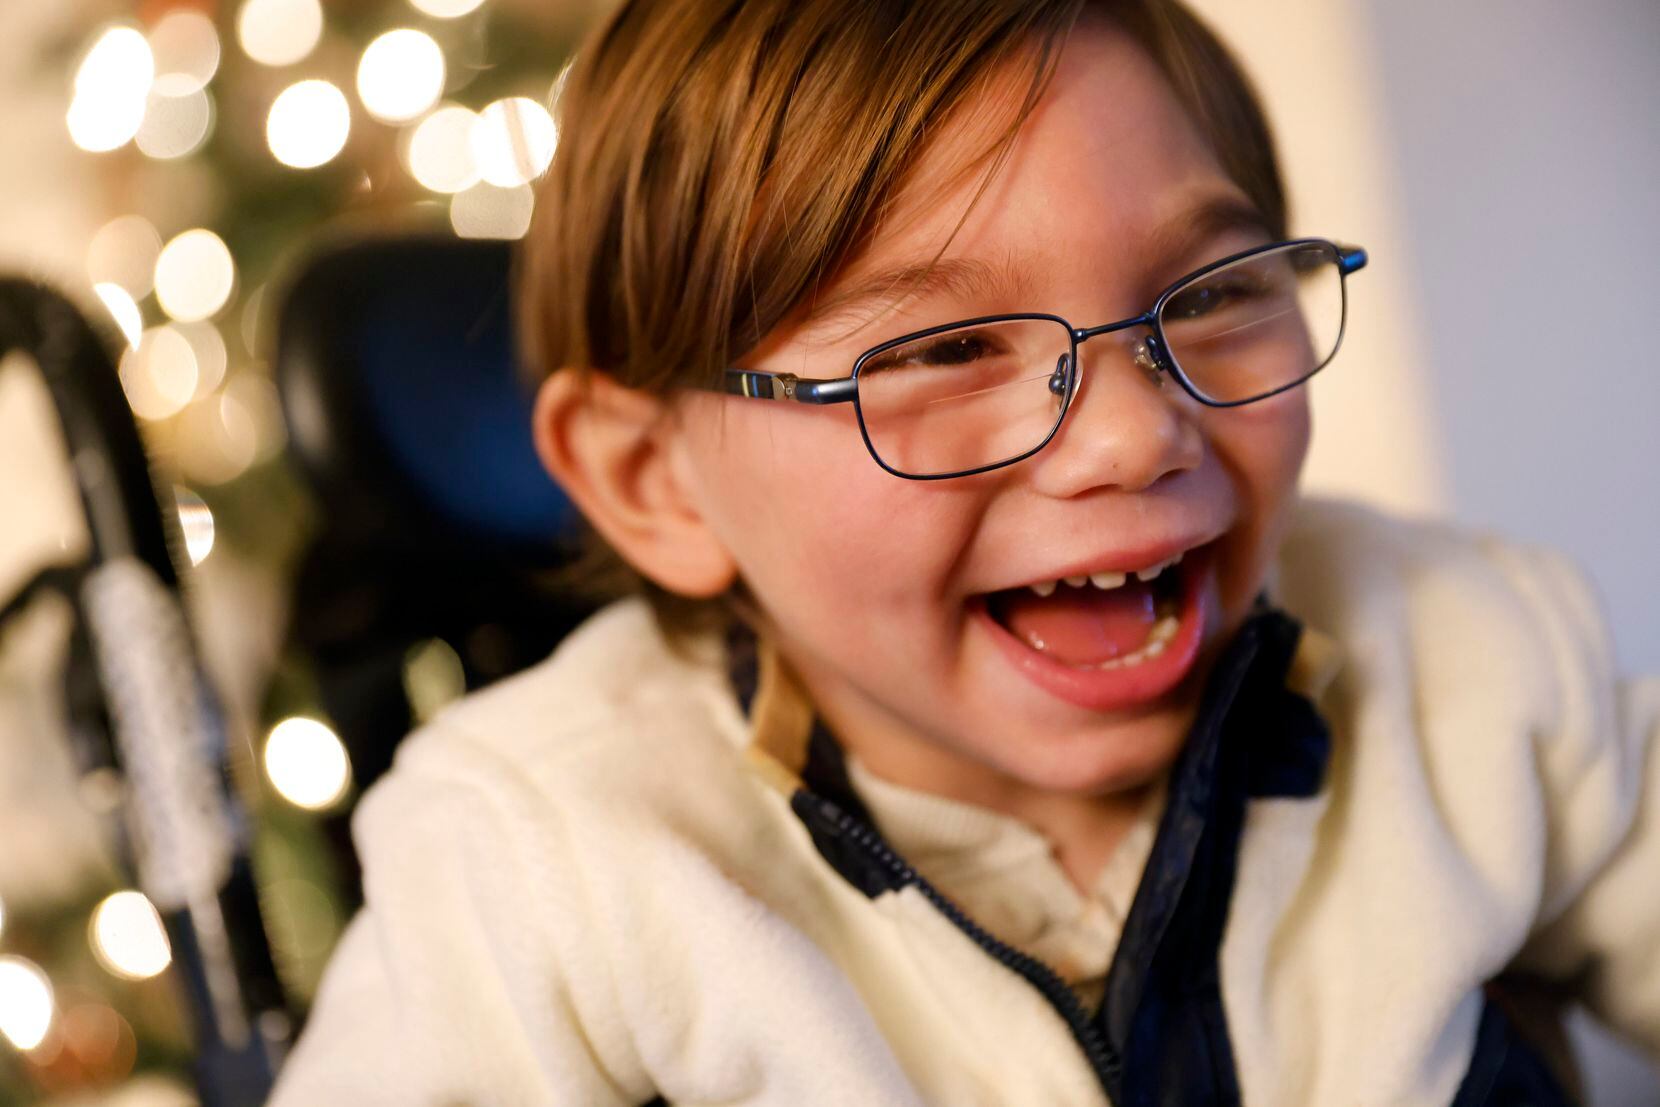 Sutton, who uses a wheelchair because of his cerebral palsy, laughs with his mother, Cheyenne Oakley, at their Burleson, Texas home. Sutton was in a class of mostly nonverbal 3-year-olds with disabilities at Norwood Elementary. Some teachers are accused of muffling the students' cries with their own hands, scratching them underneath their armpits to not leave any visible marks and openly ridiculing their disabilities. Cheyenne is one of several parents who are asking the school district and PD to investigate the incident, and the school to place cameras in her classroom. (Tom Fox/The Dallas Morning News)